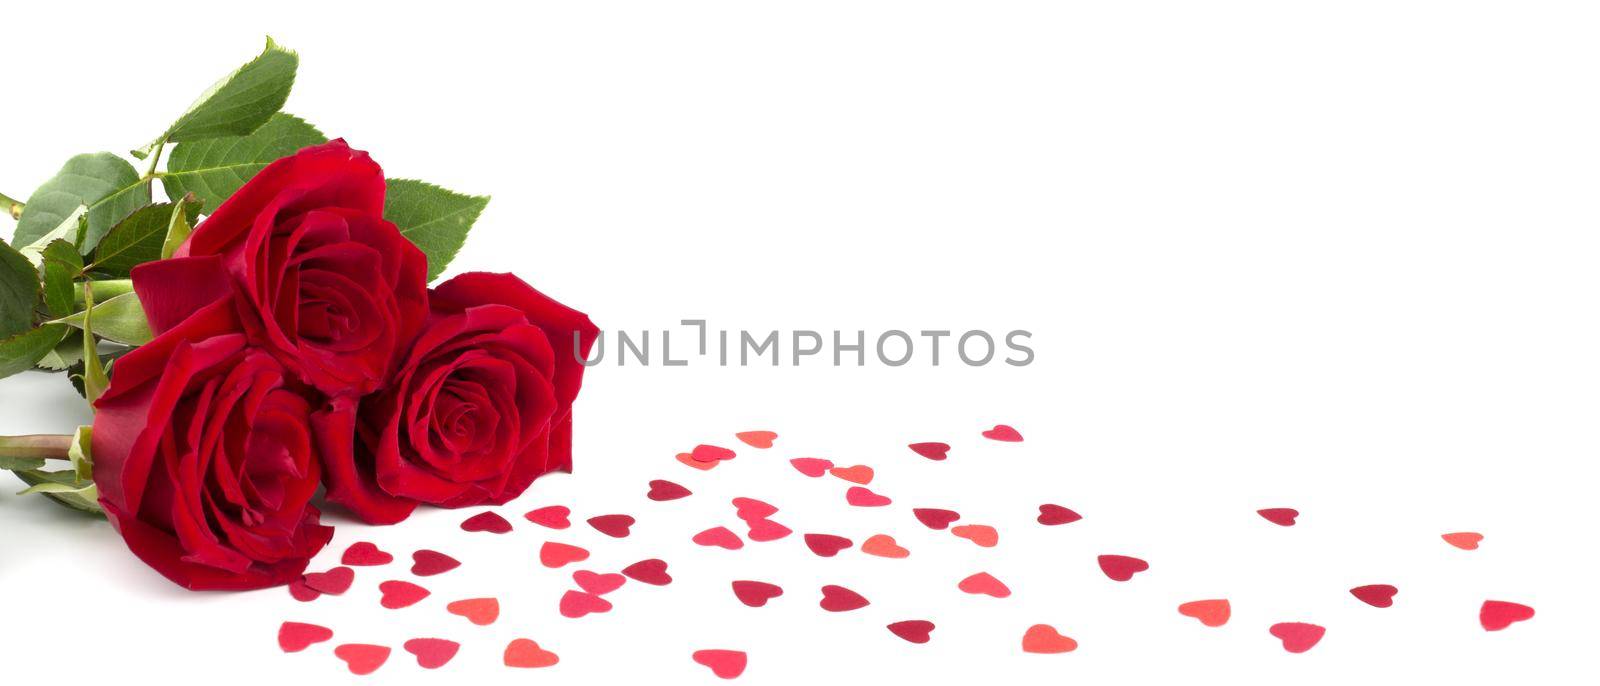 Three red roses and many small paper hearts isolated on white background, love romantic gift for Valentine day